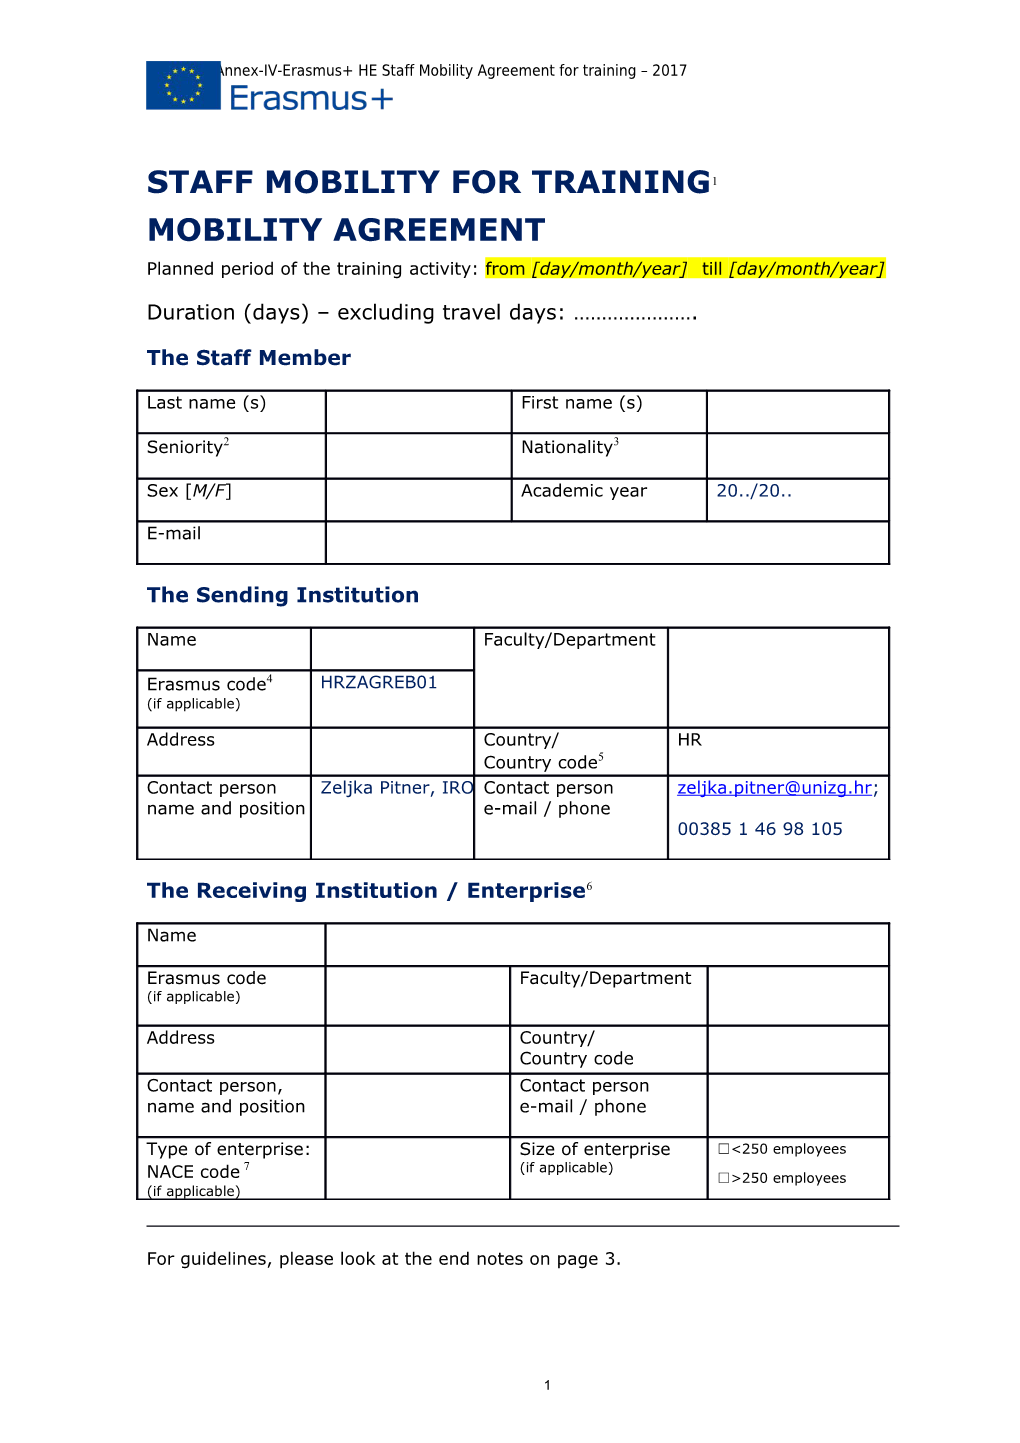 Gfna-II-C-Annex-IV-Erasmus+ HE Staff Mobility Agreement for Training 2017